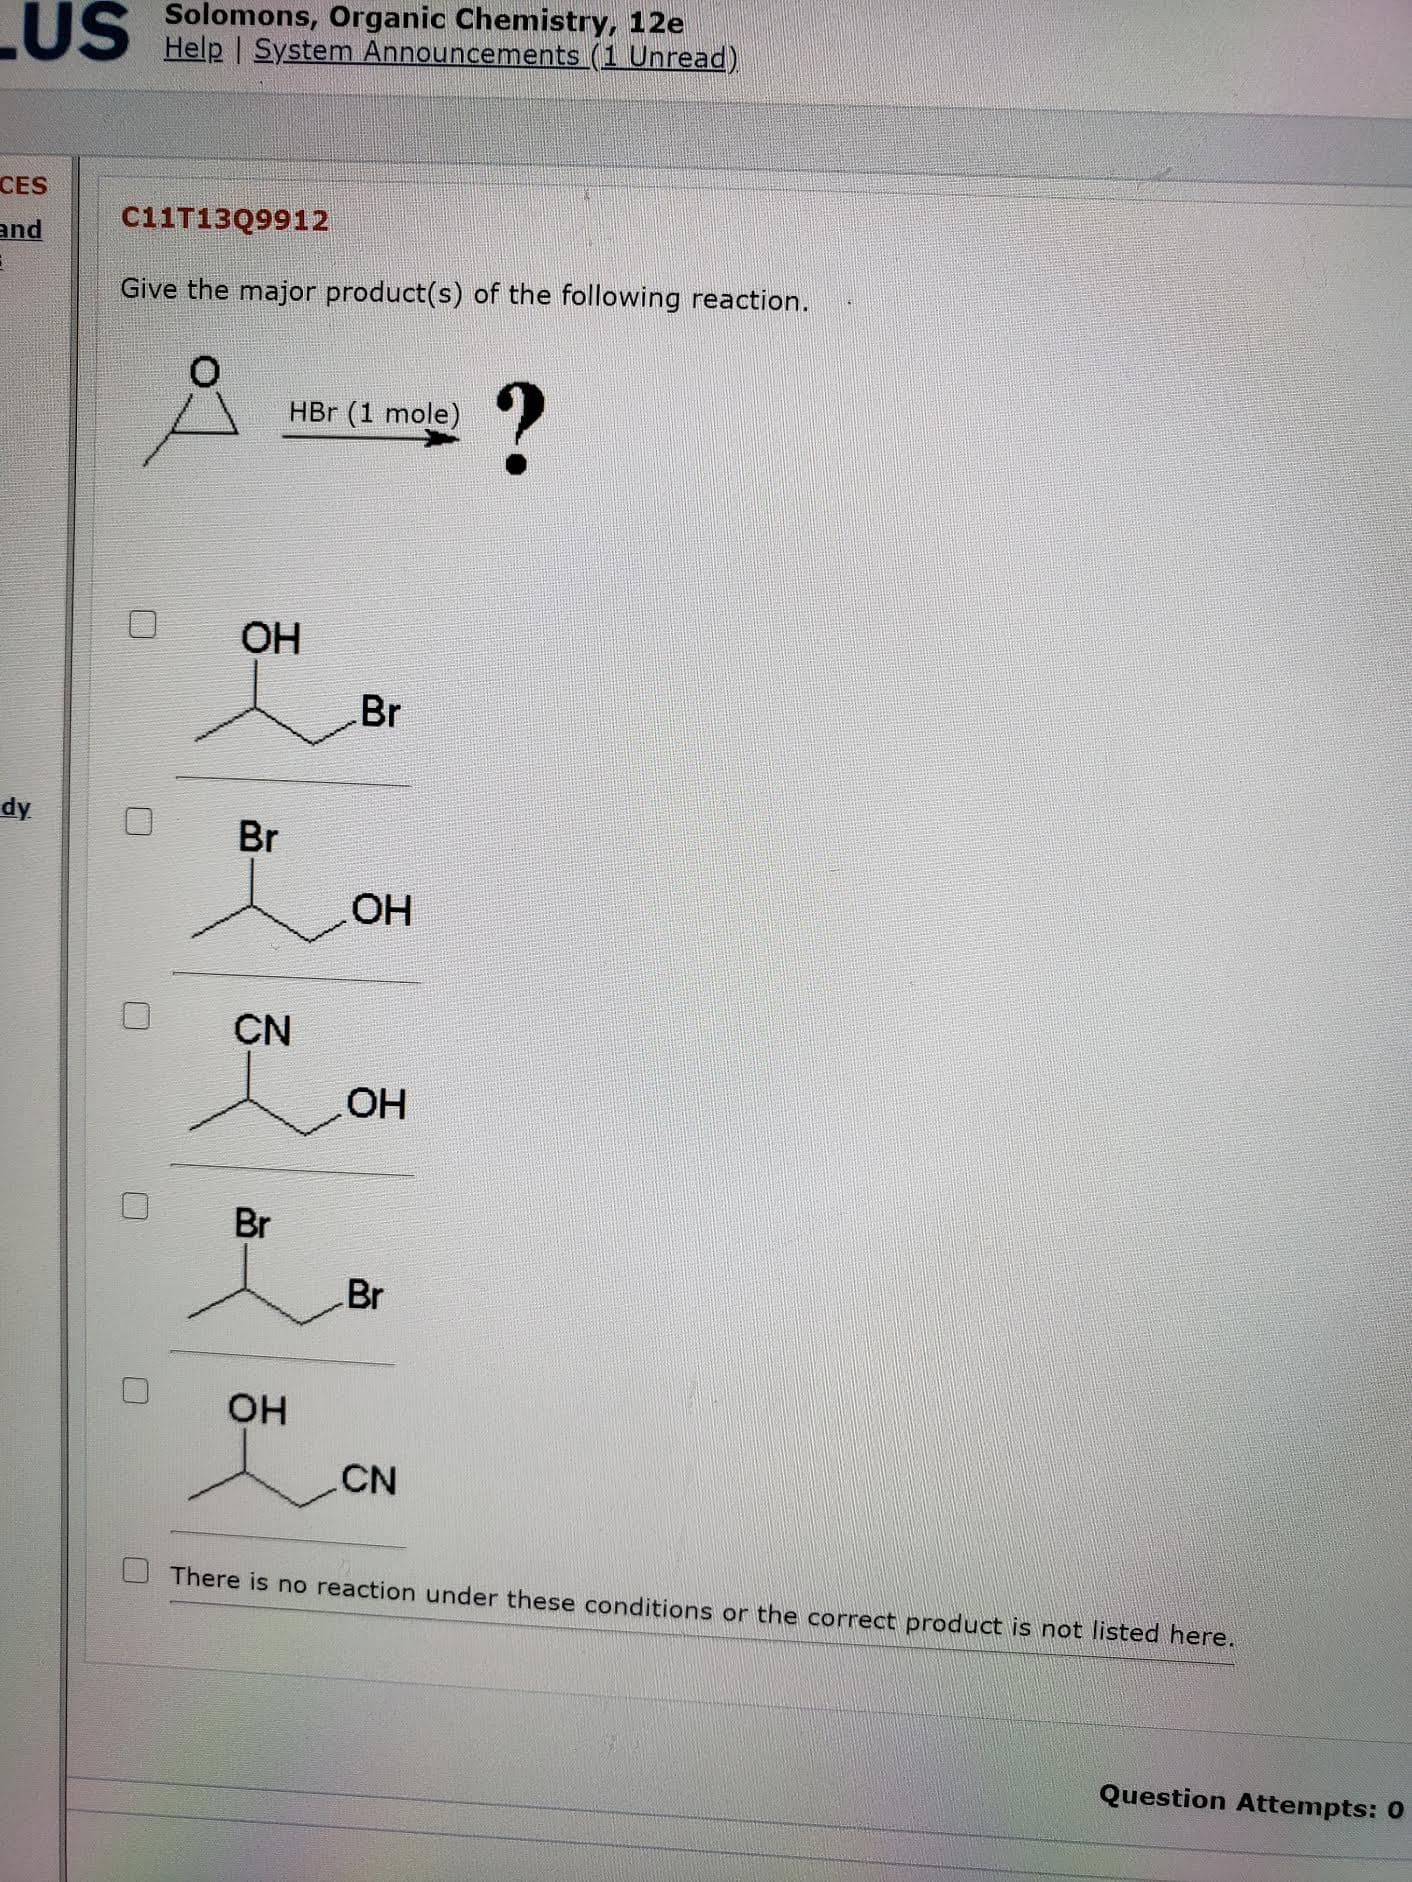 C11T13Q9912
Give the major product(s) of the following reaction.
HBr (1 mole)
